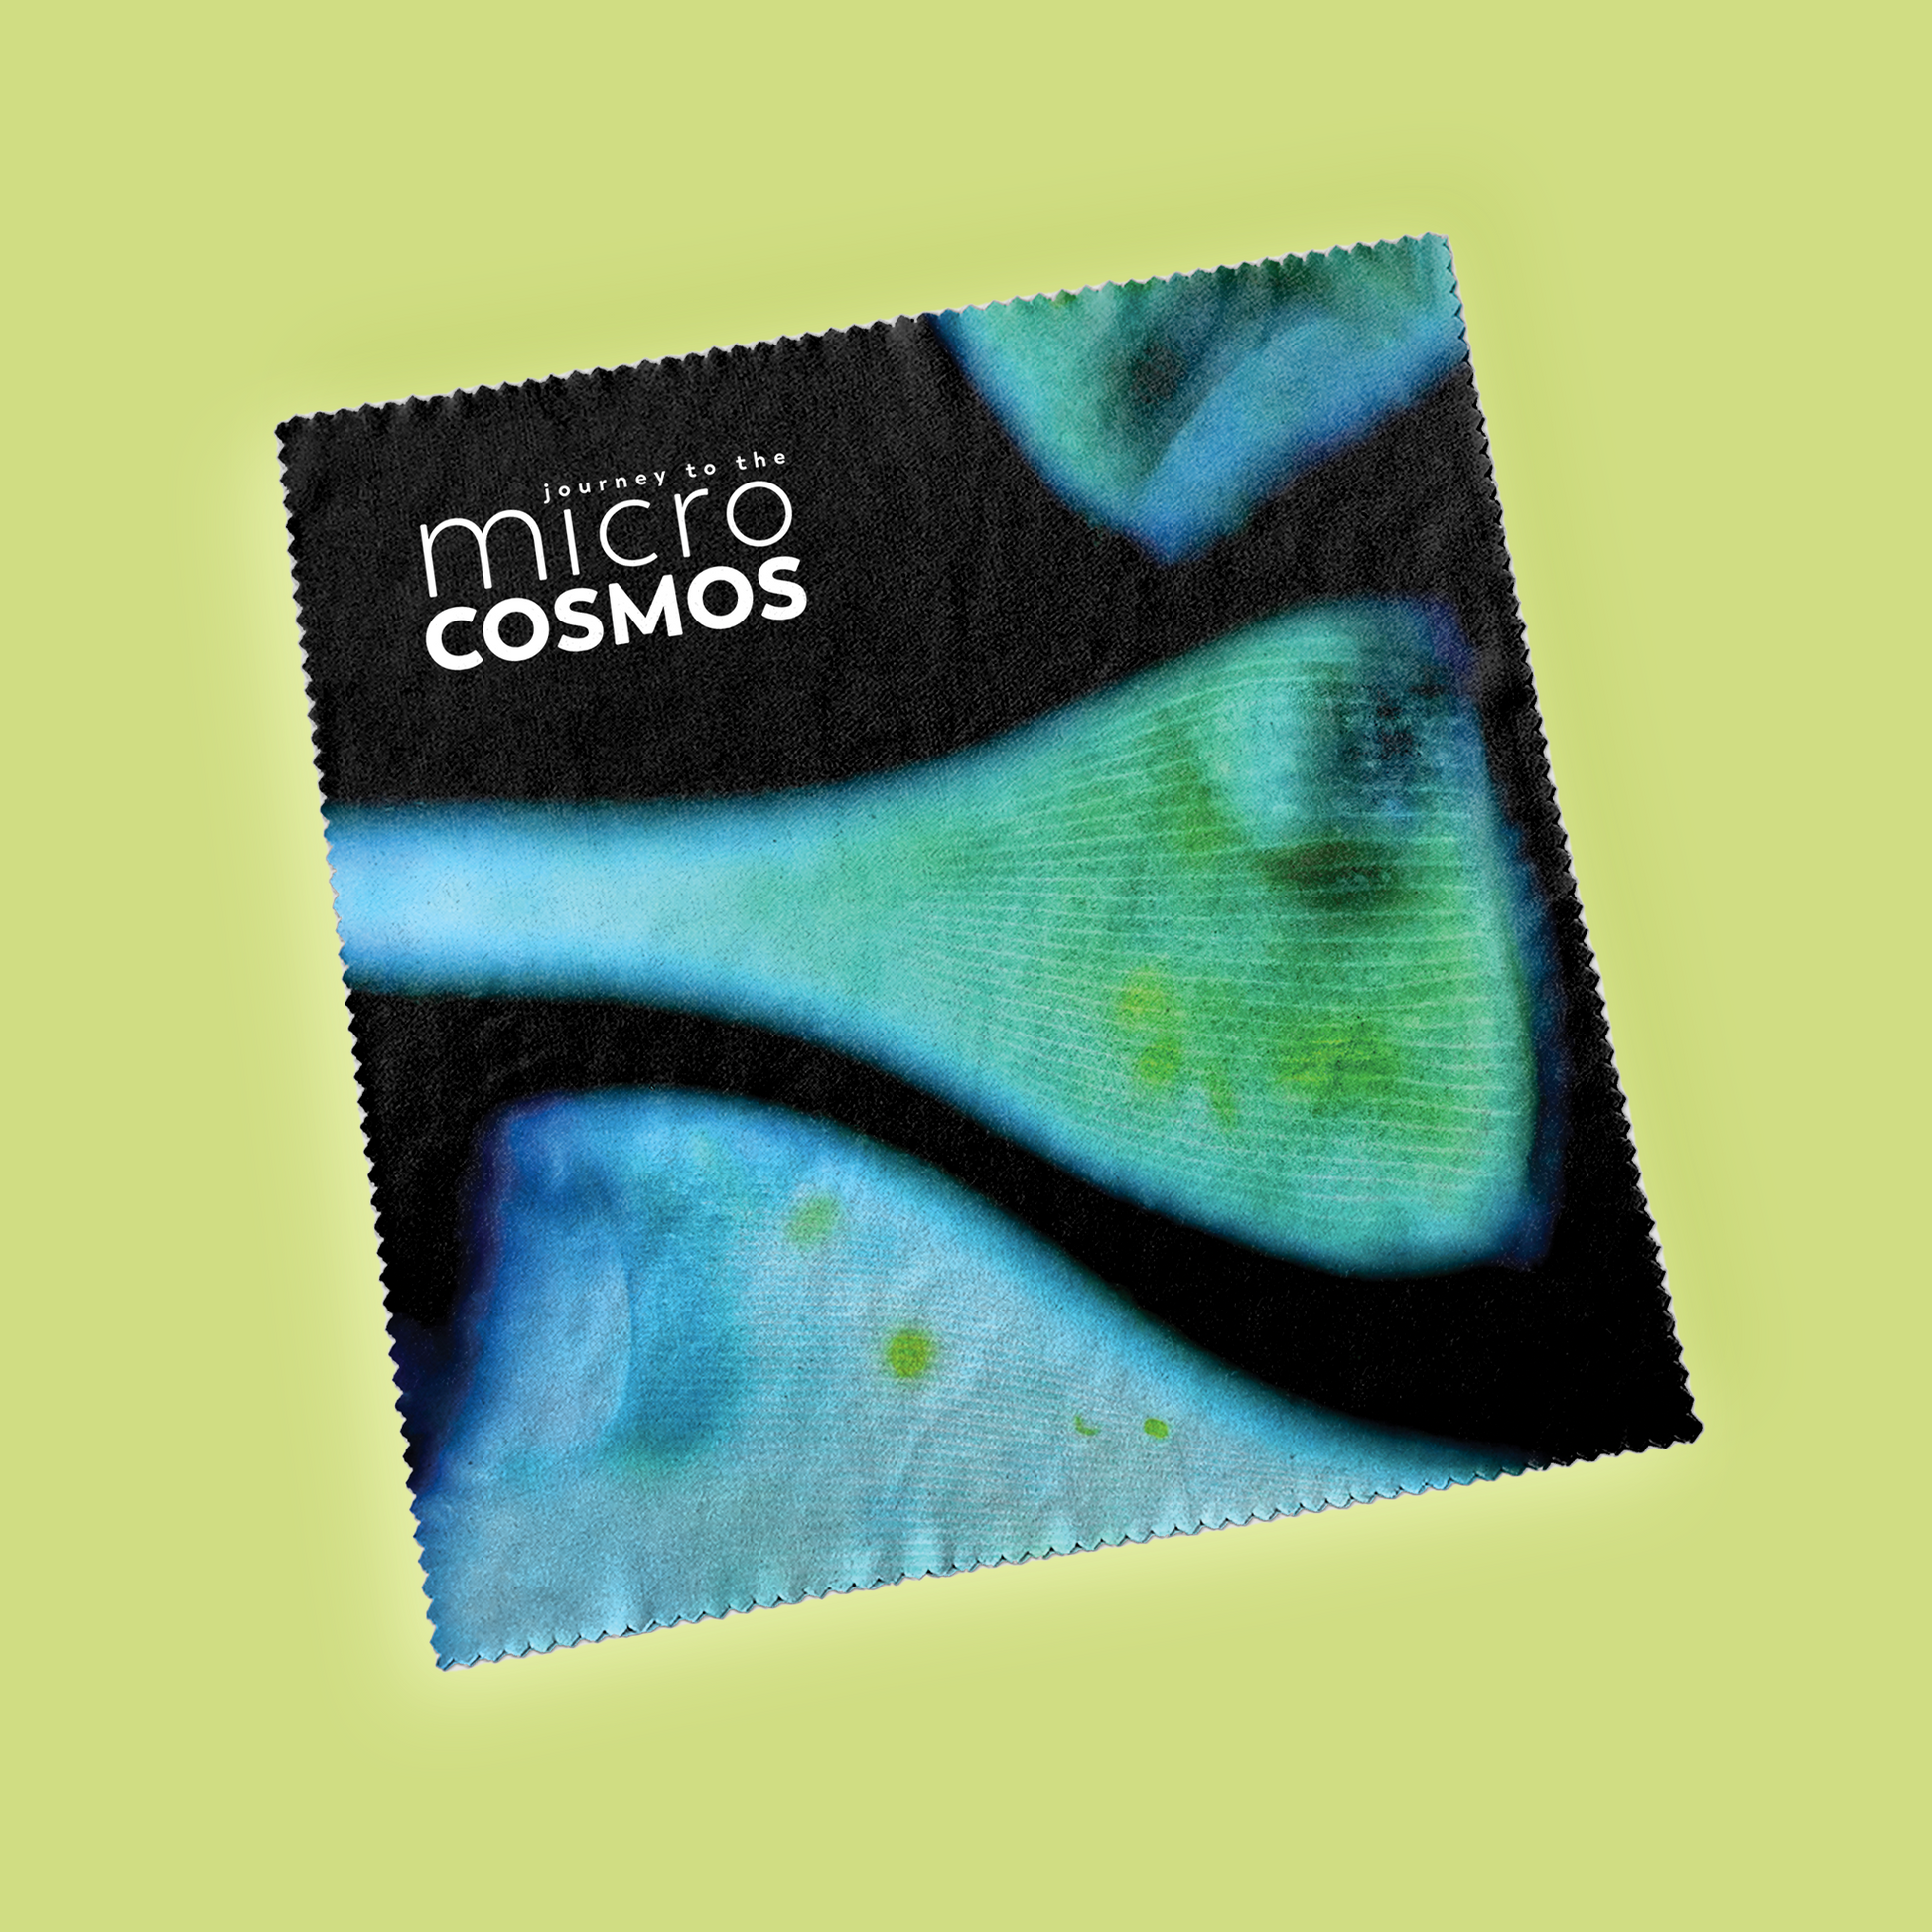 Photograph of a microfiber cloth with a printed image of Stentors and the Journey to the Microcosmos logo on it